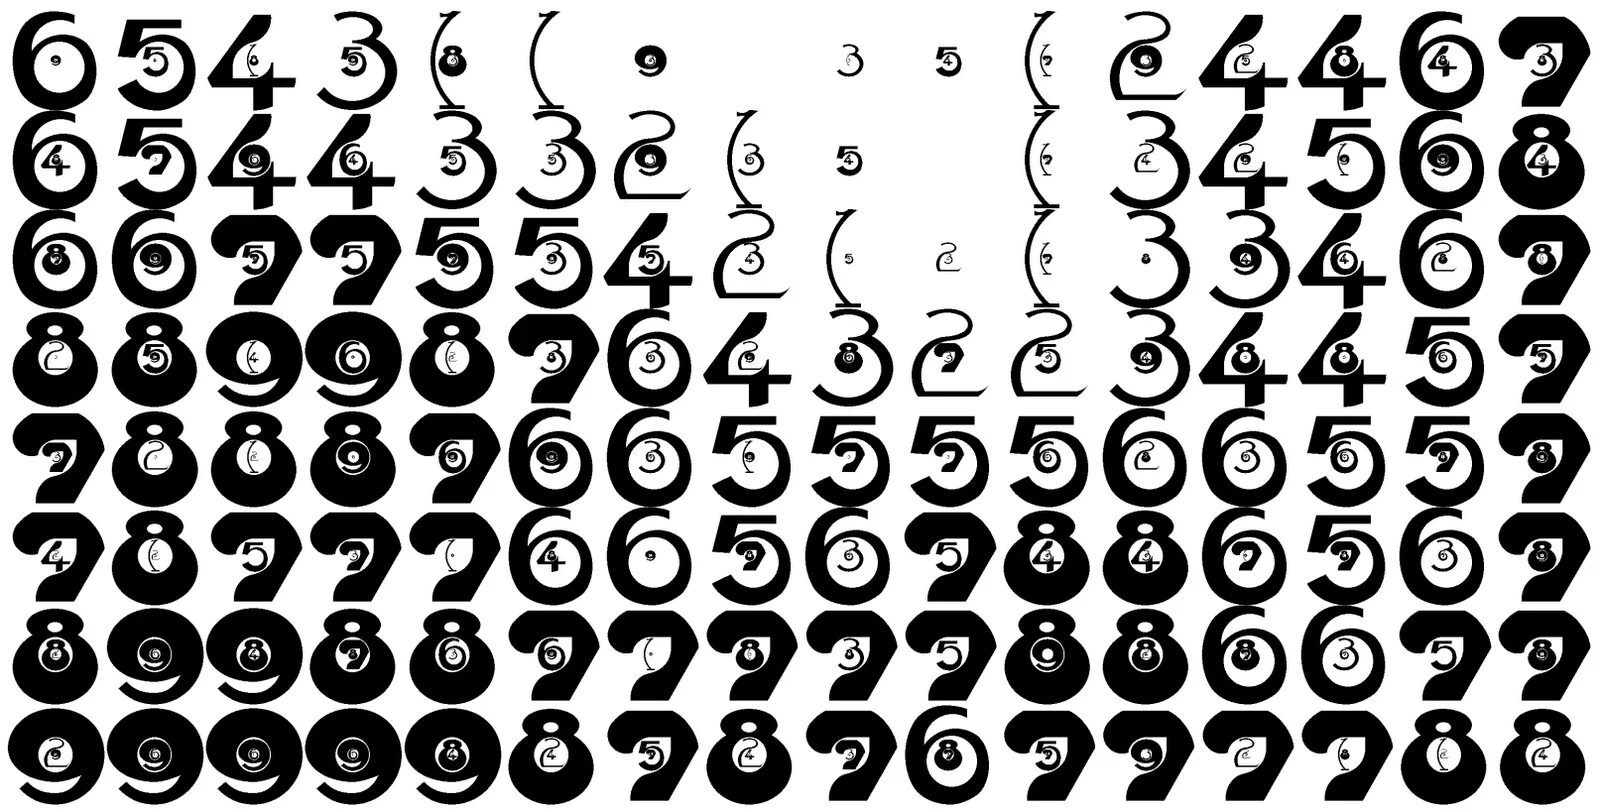 Numbers fonts. Number fonts. Fonts for number. Cool numbers font. Numbers ttf.